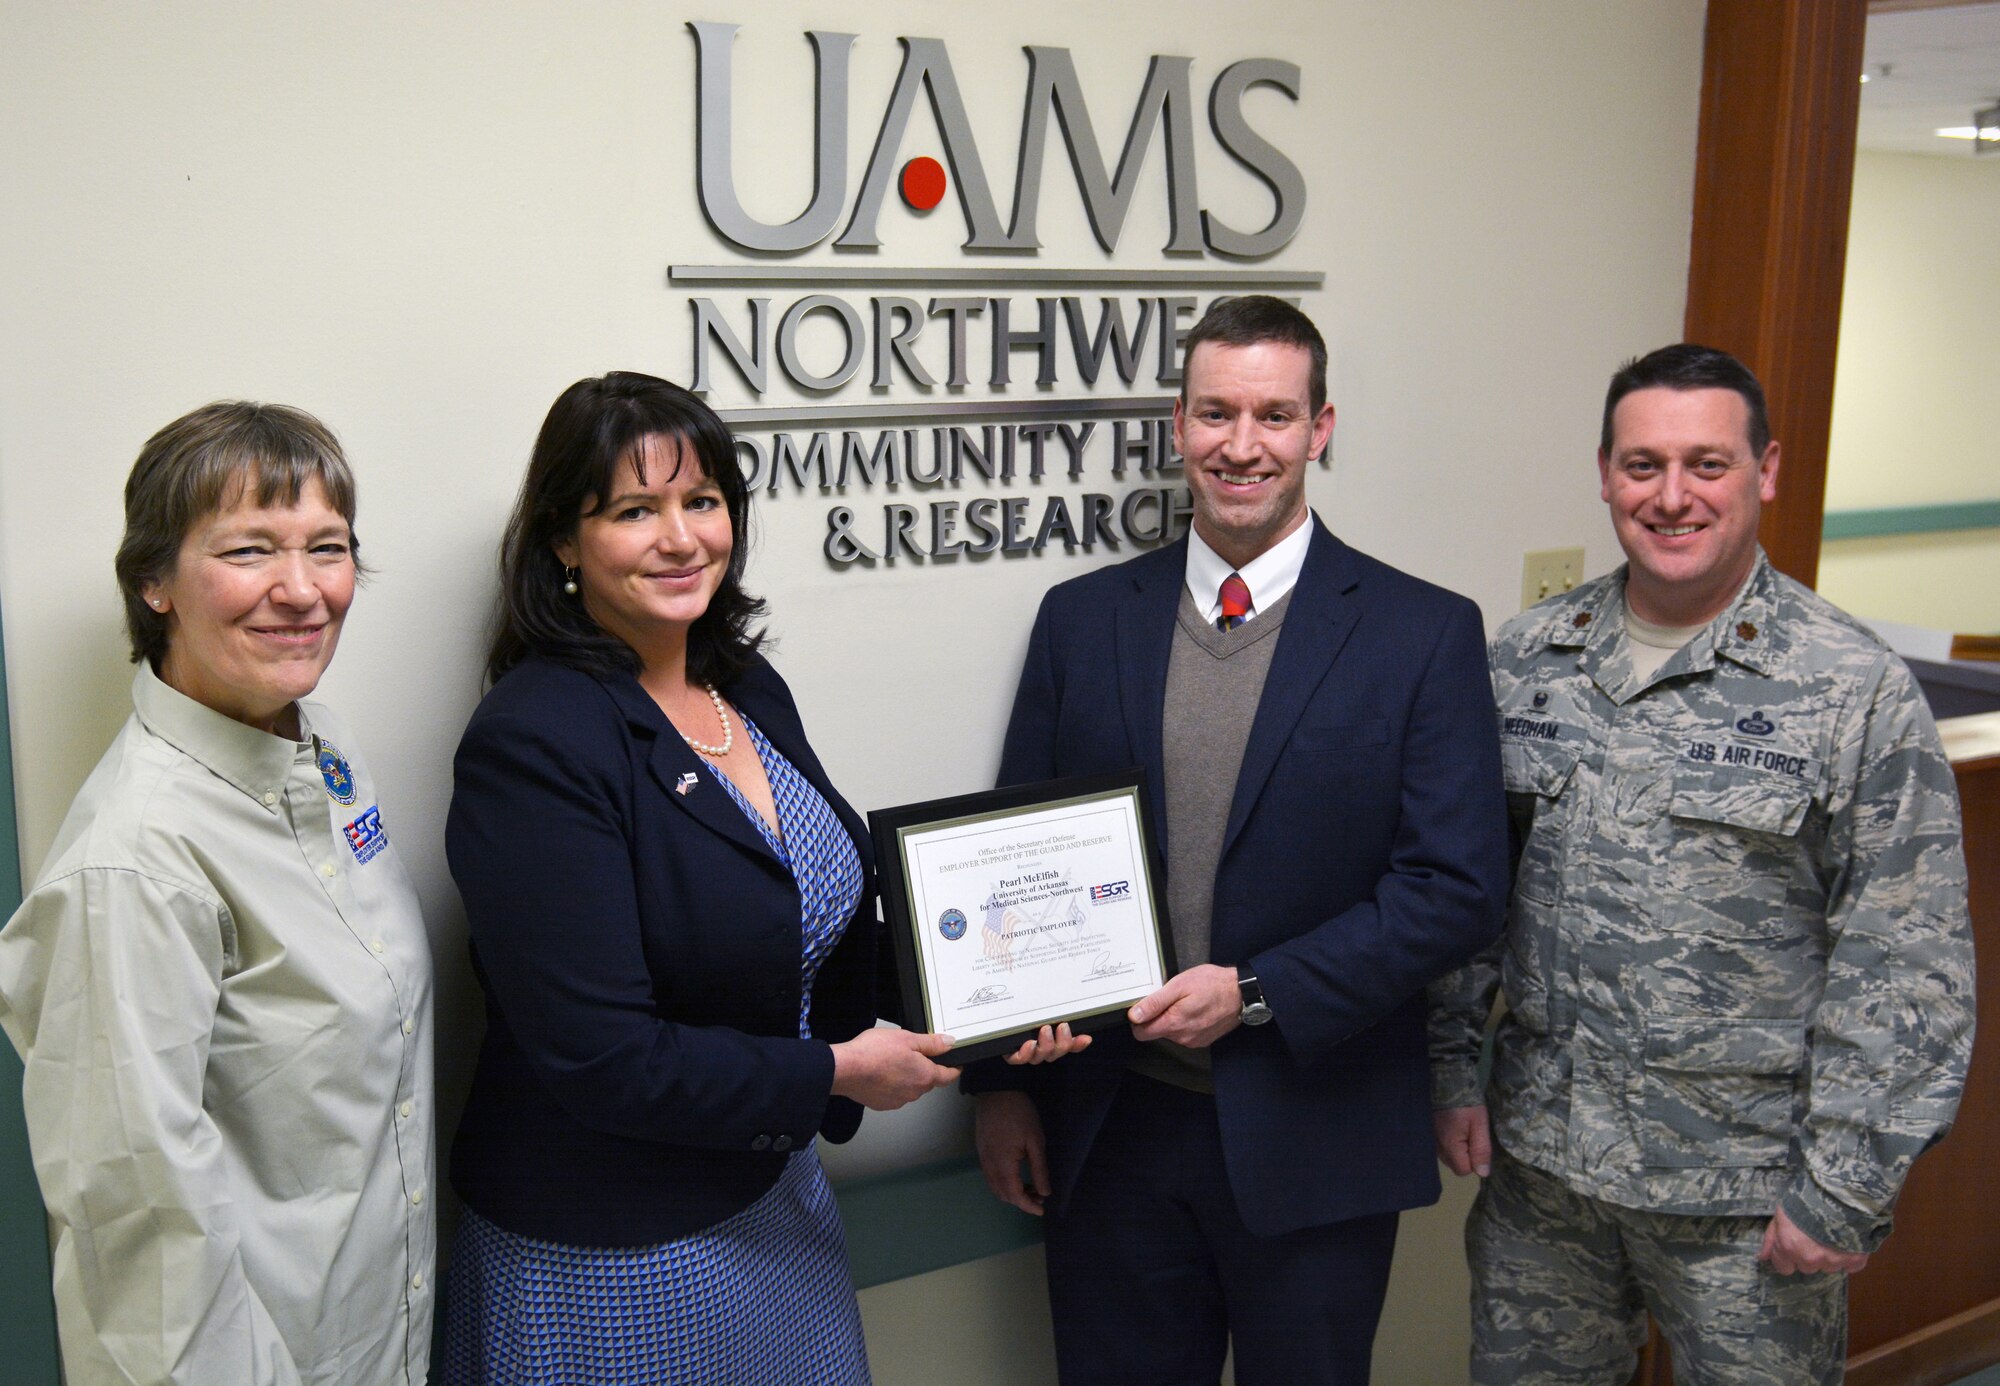 Dr. Pearl McElfish, University of Arkansas for Medical Sciences-Northwest director of the office of community health and research, receives the Employer Support of the Guard and Reserve Patriot Award Jan. 1, 2016, from Lt. Col. Judith Mathewson, left, Master Sgt. Michael Stephens, centers for disease control and prevention program director at UAMS-Northwest, and Maj. Paul Needham, commander of the 288th Operations Support Squadron, at UAMS-Northwest in Fayetteville, Ark. McElfish is receiving the award for contributing to national security and protecting liberty and freedom by supporting employee participation in America’s National Guard and Reserve force. Stephens is a first sergeant in the 288th OSS as a drill-status guardsman. (Courtesy photo)